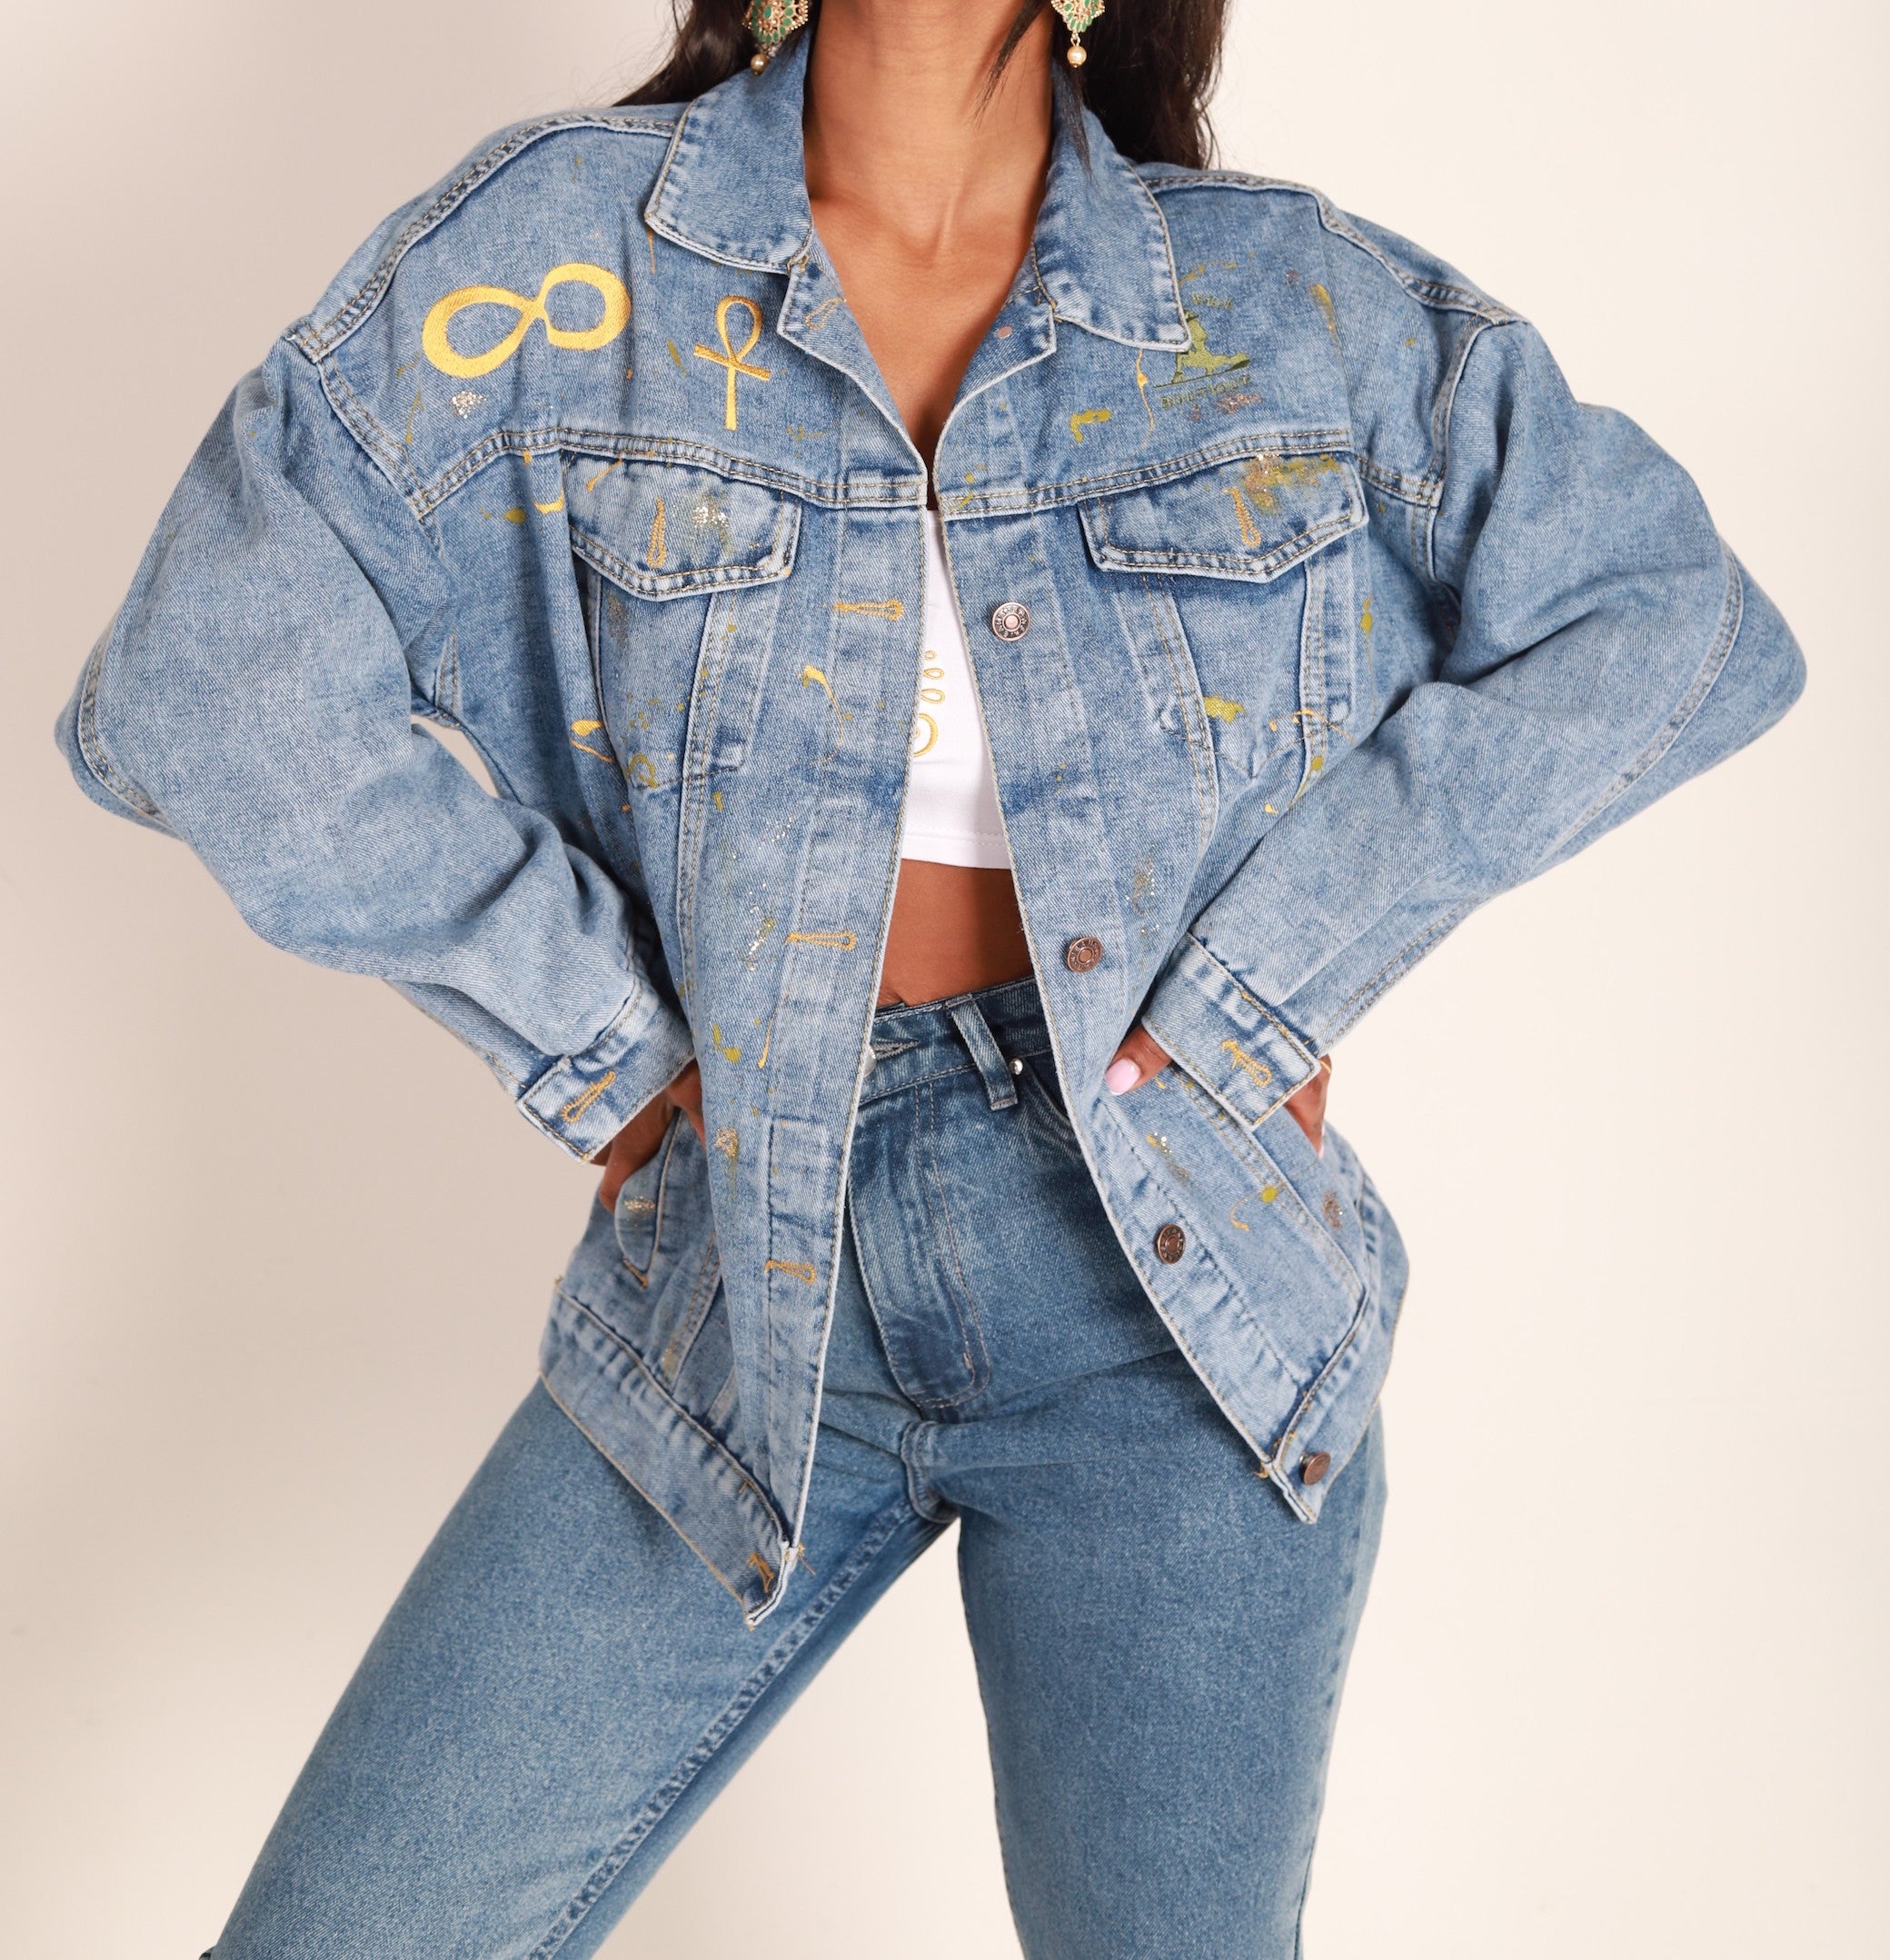 The Perfect Oversized Denim Jacket to Wear All Year Round - Meagan's Moda